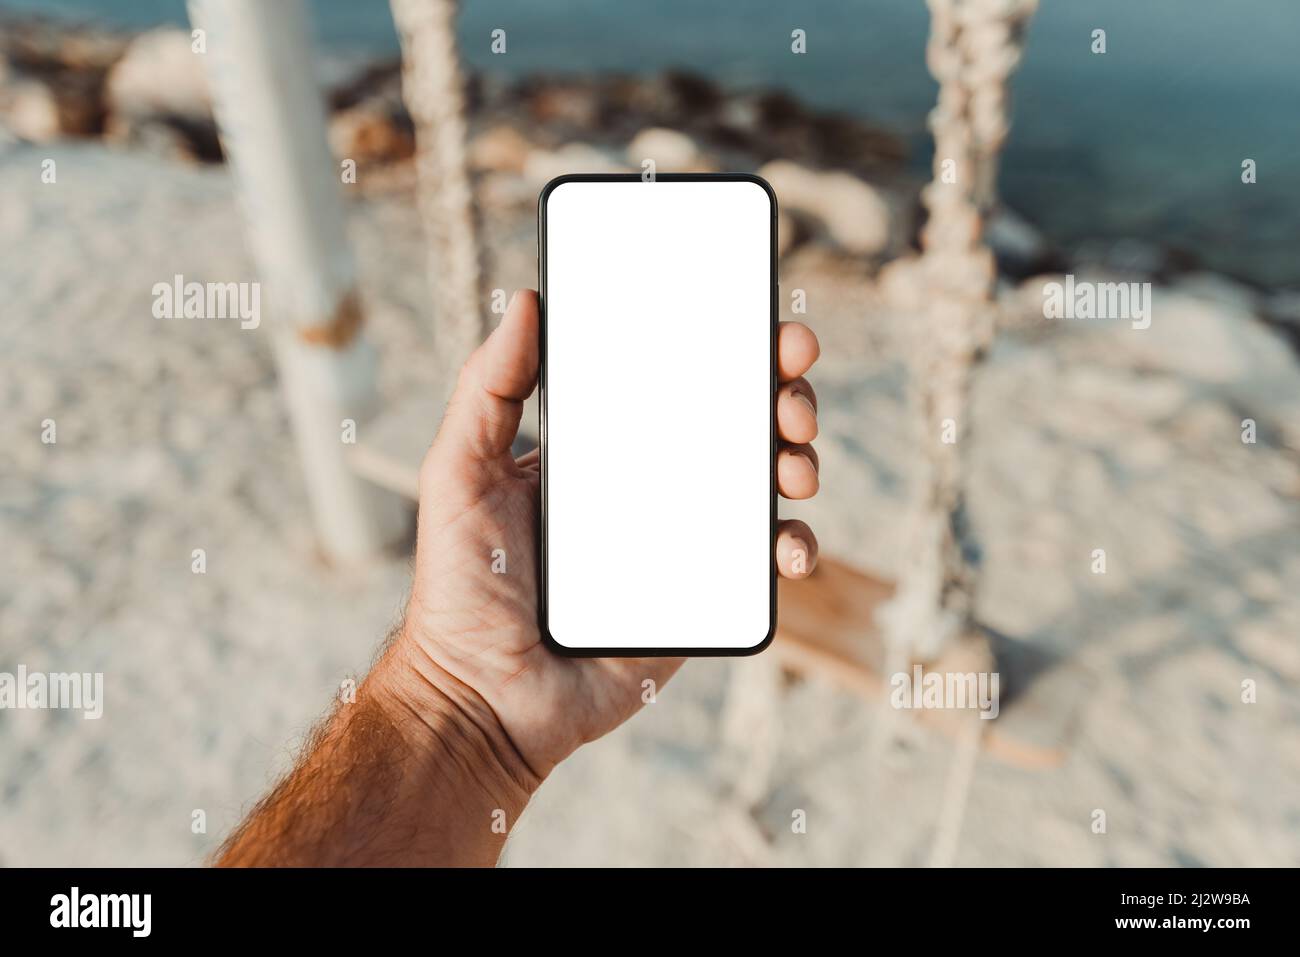 Man standing by the sea and holding mobile smart phone with blank mockup screen, closeup of hand and device, selective focus Stock Photo